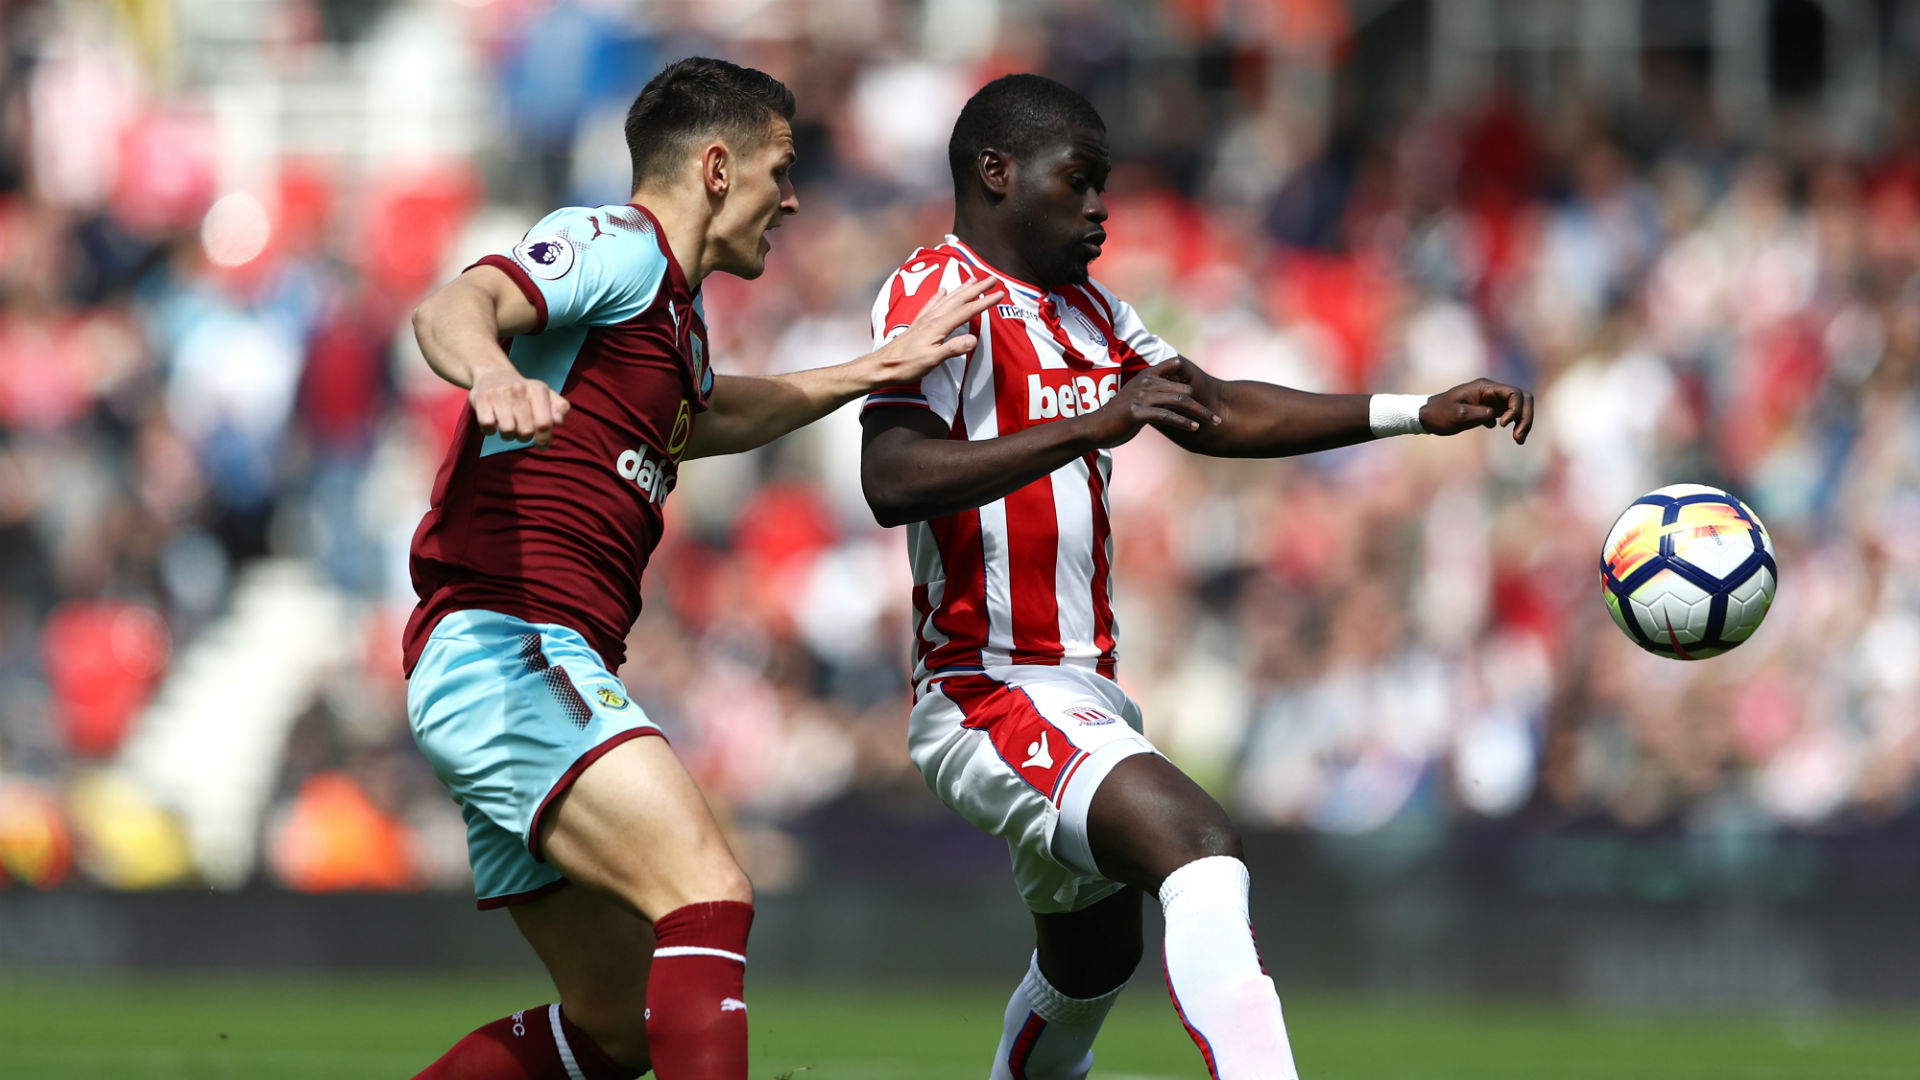 Stoke City 1 Burnley 1: Potters pegged back again as relegation nears